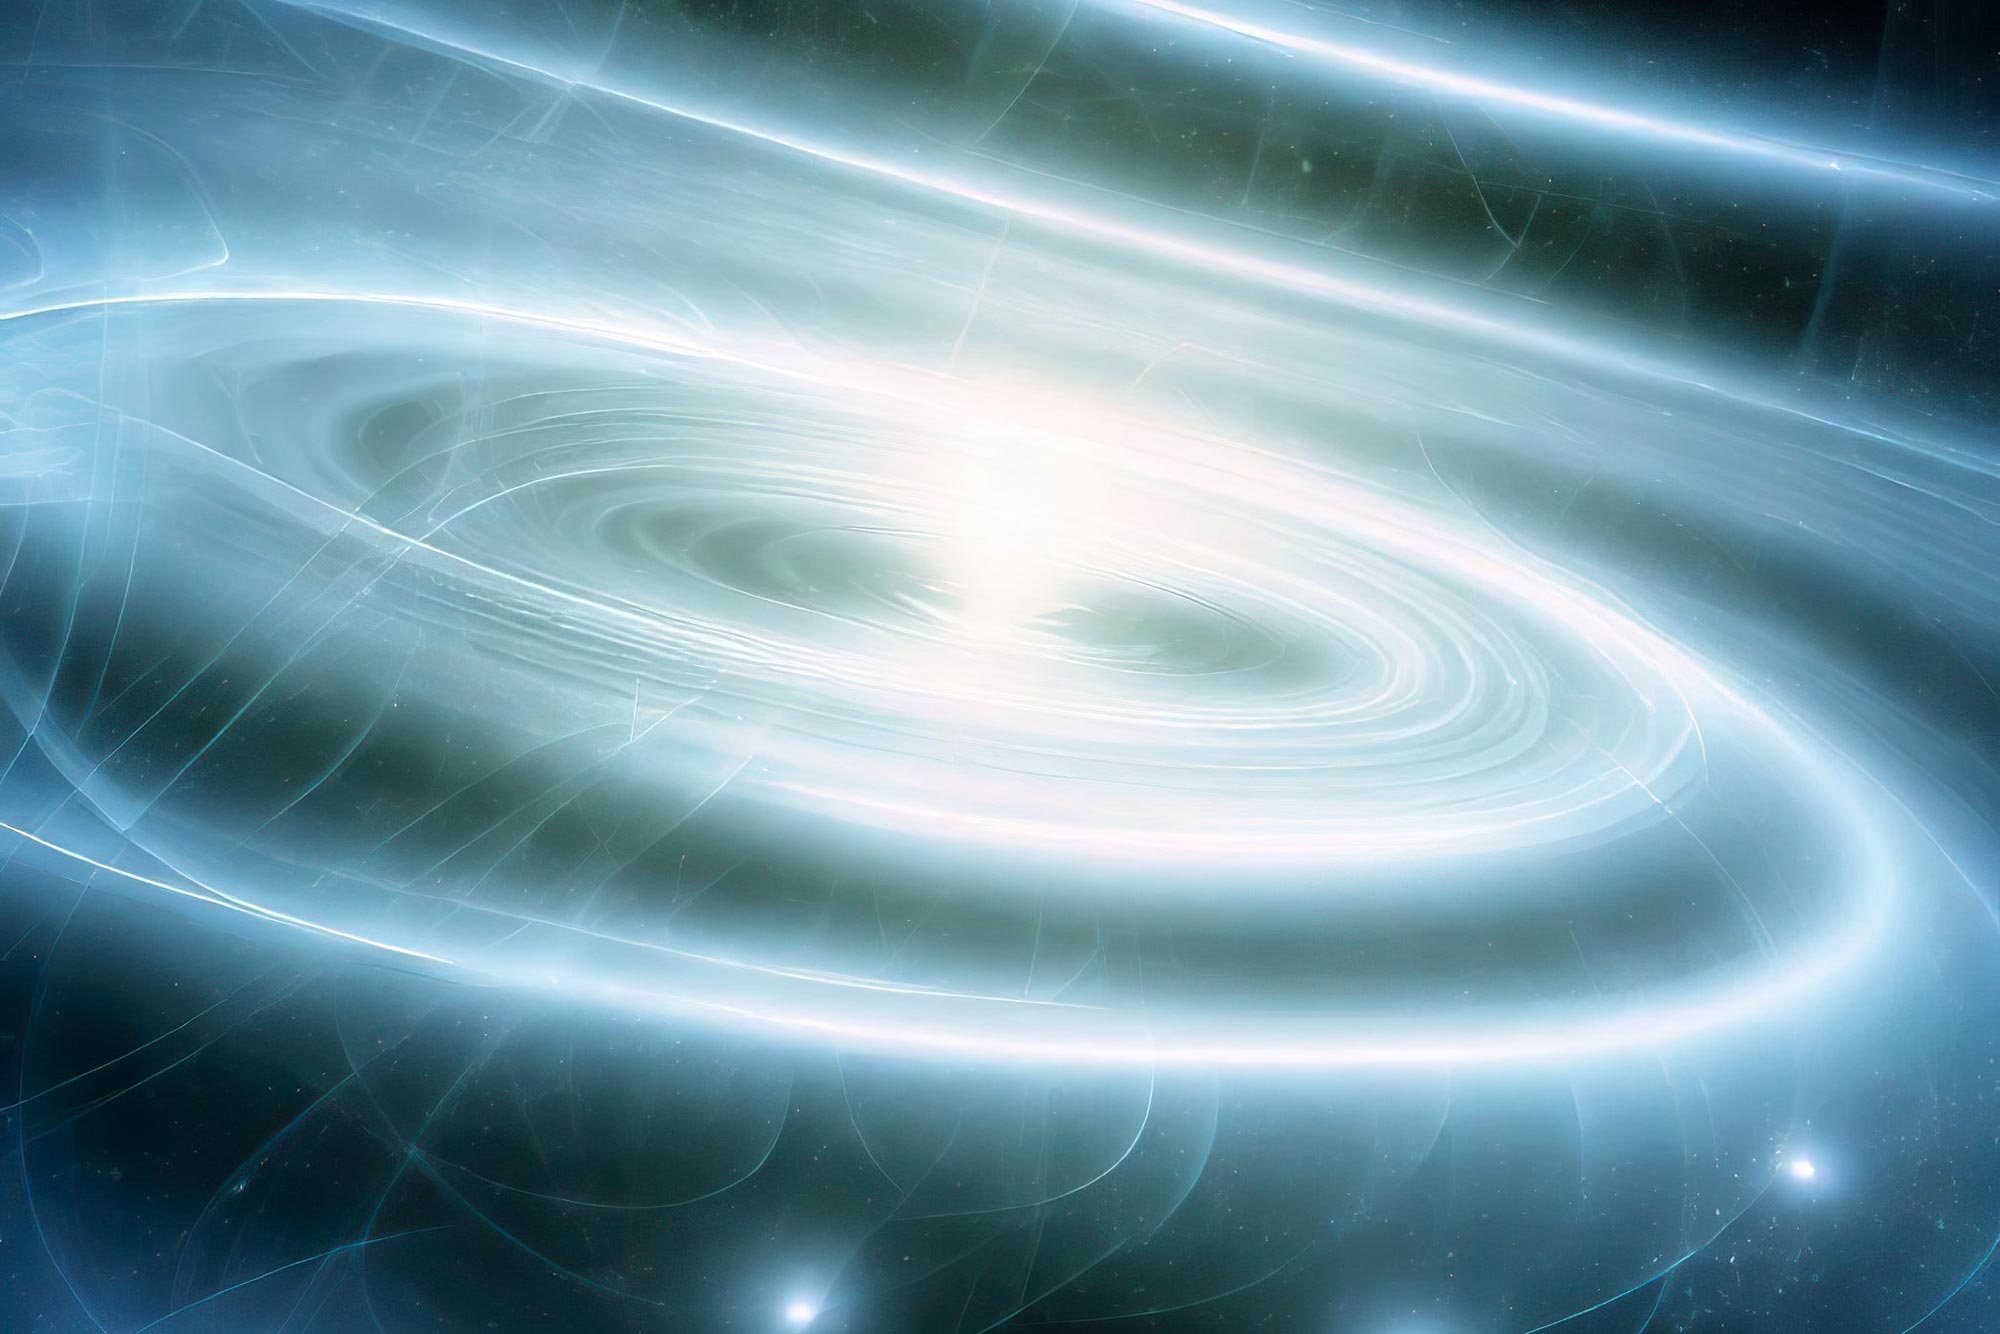 Innovation in gravitational wave detectors could help unlock secrets of the universe